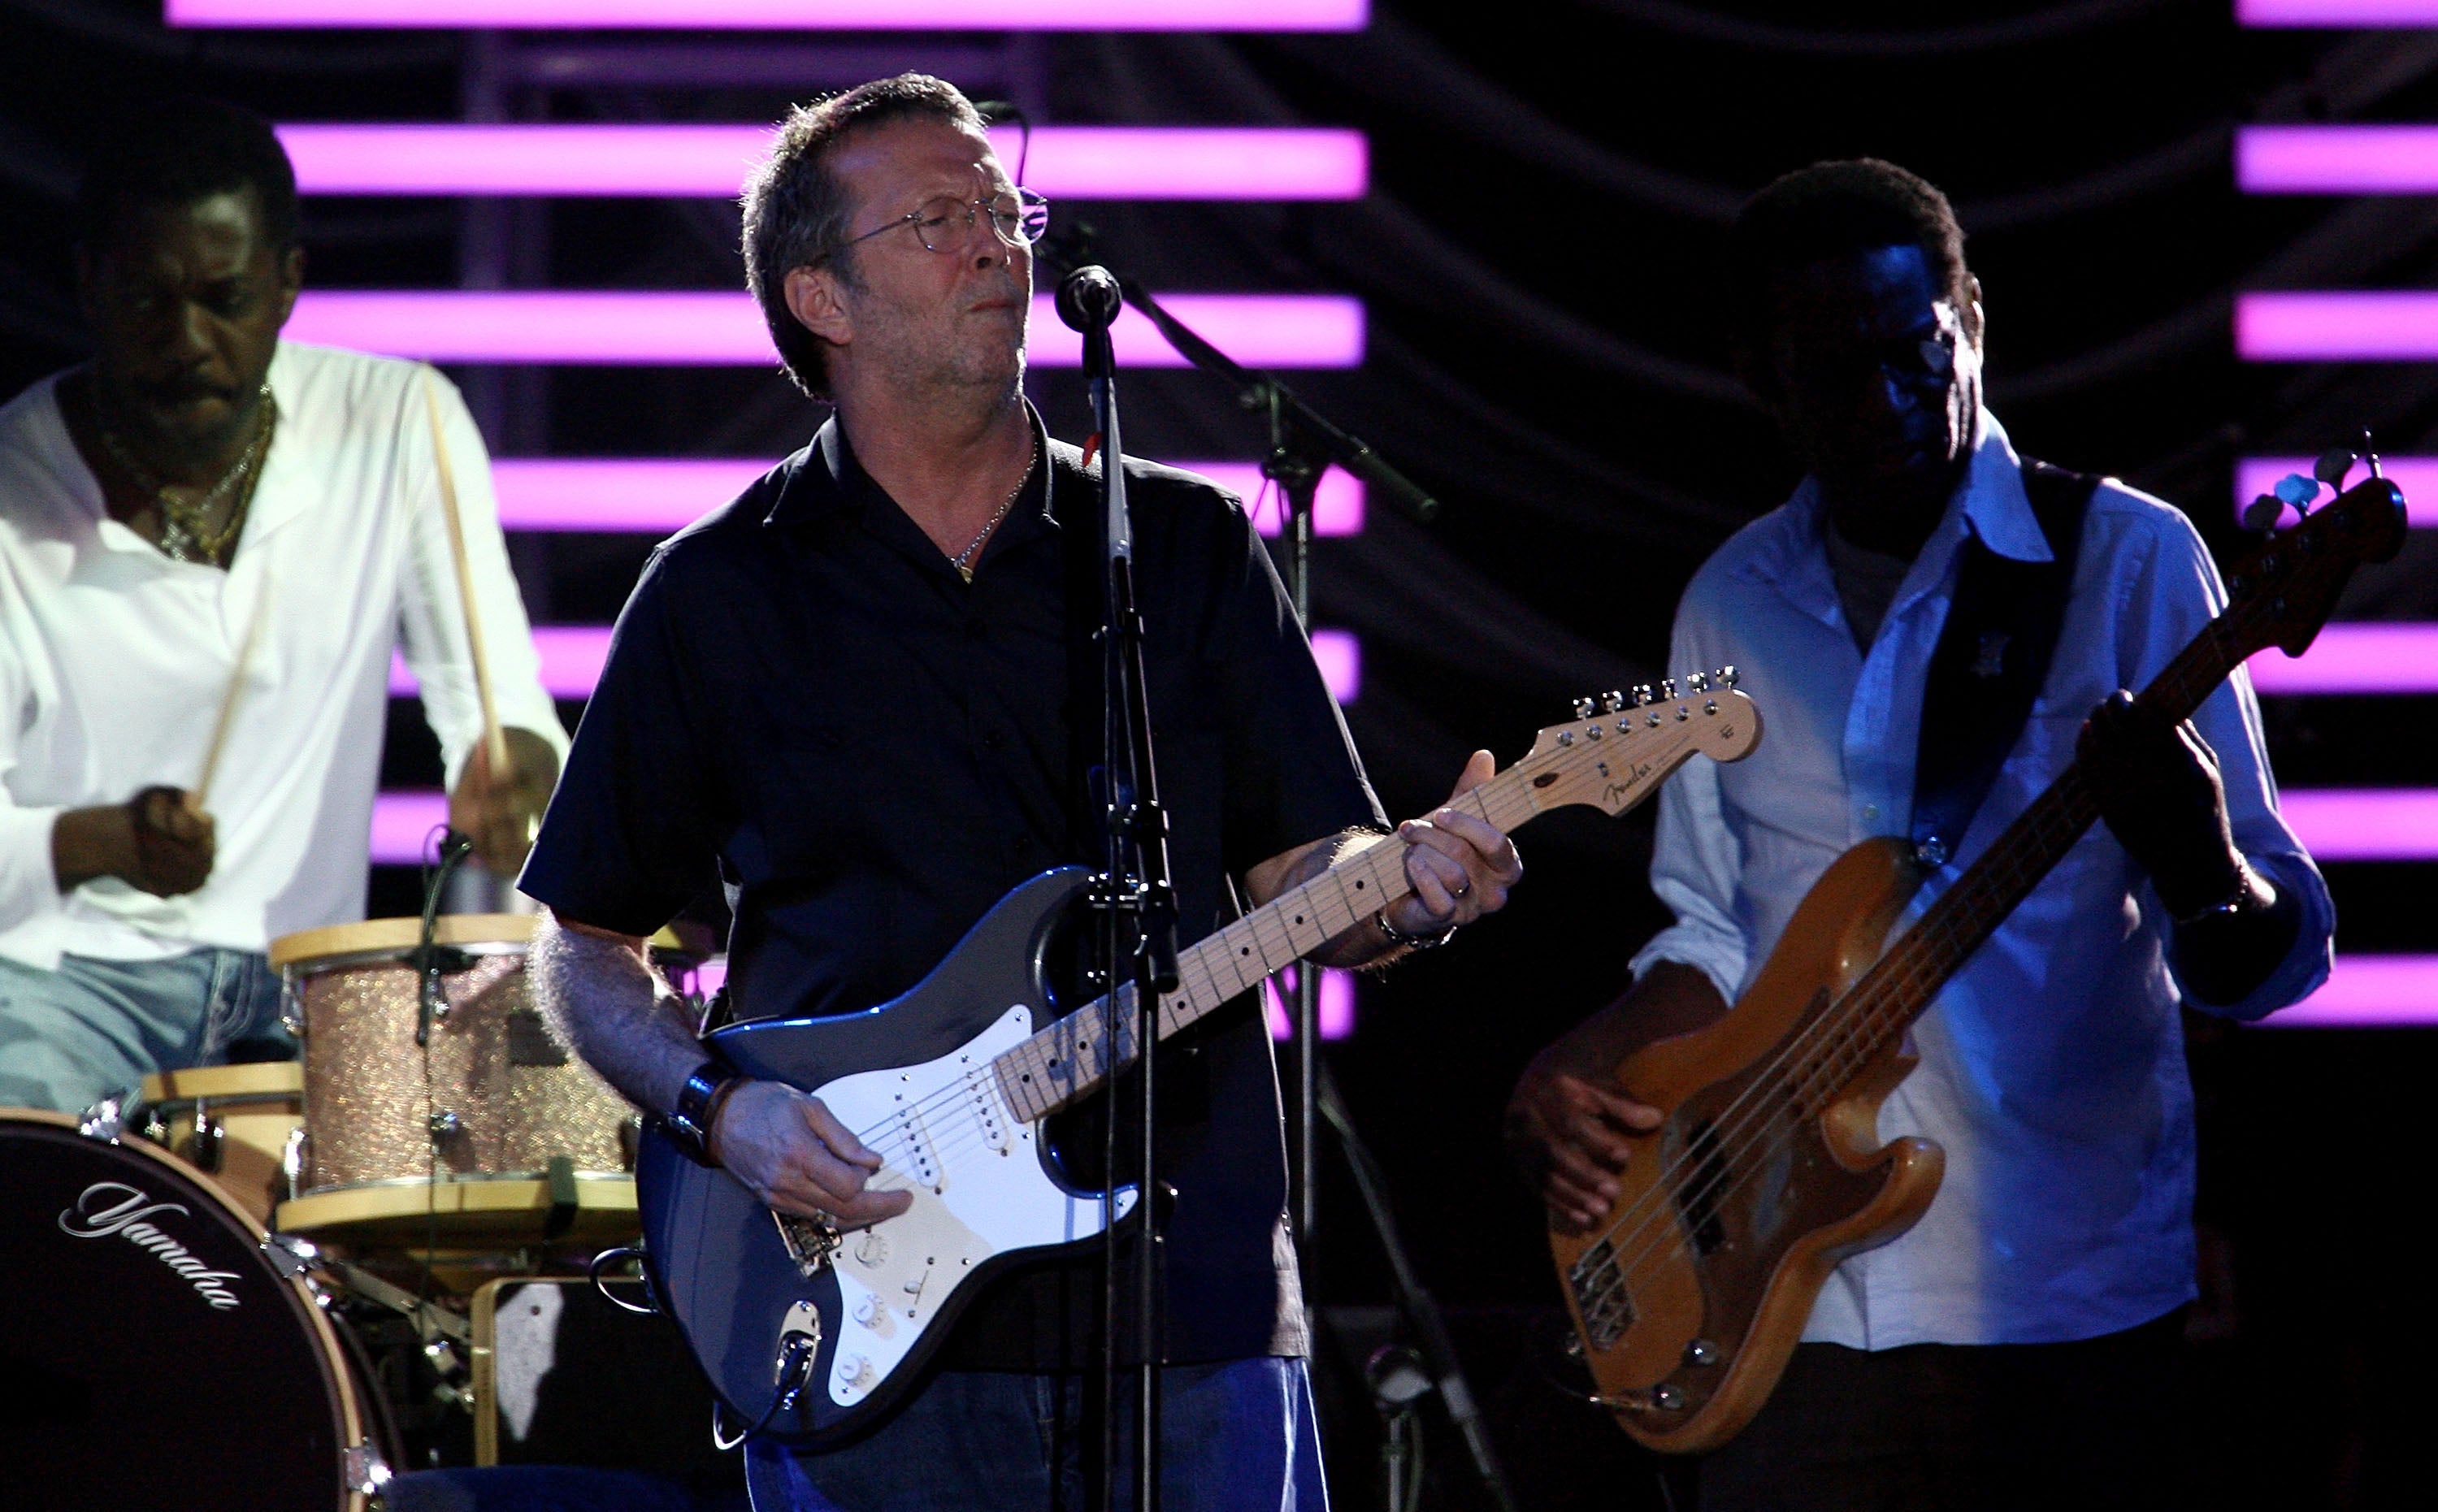 Eric Clapton performs on stage in Perth, Australia, in 2011, with a Fender Stratocaster guitar.